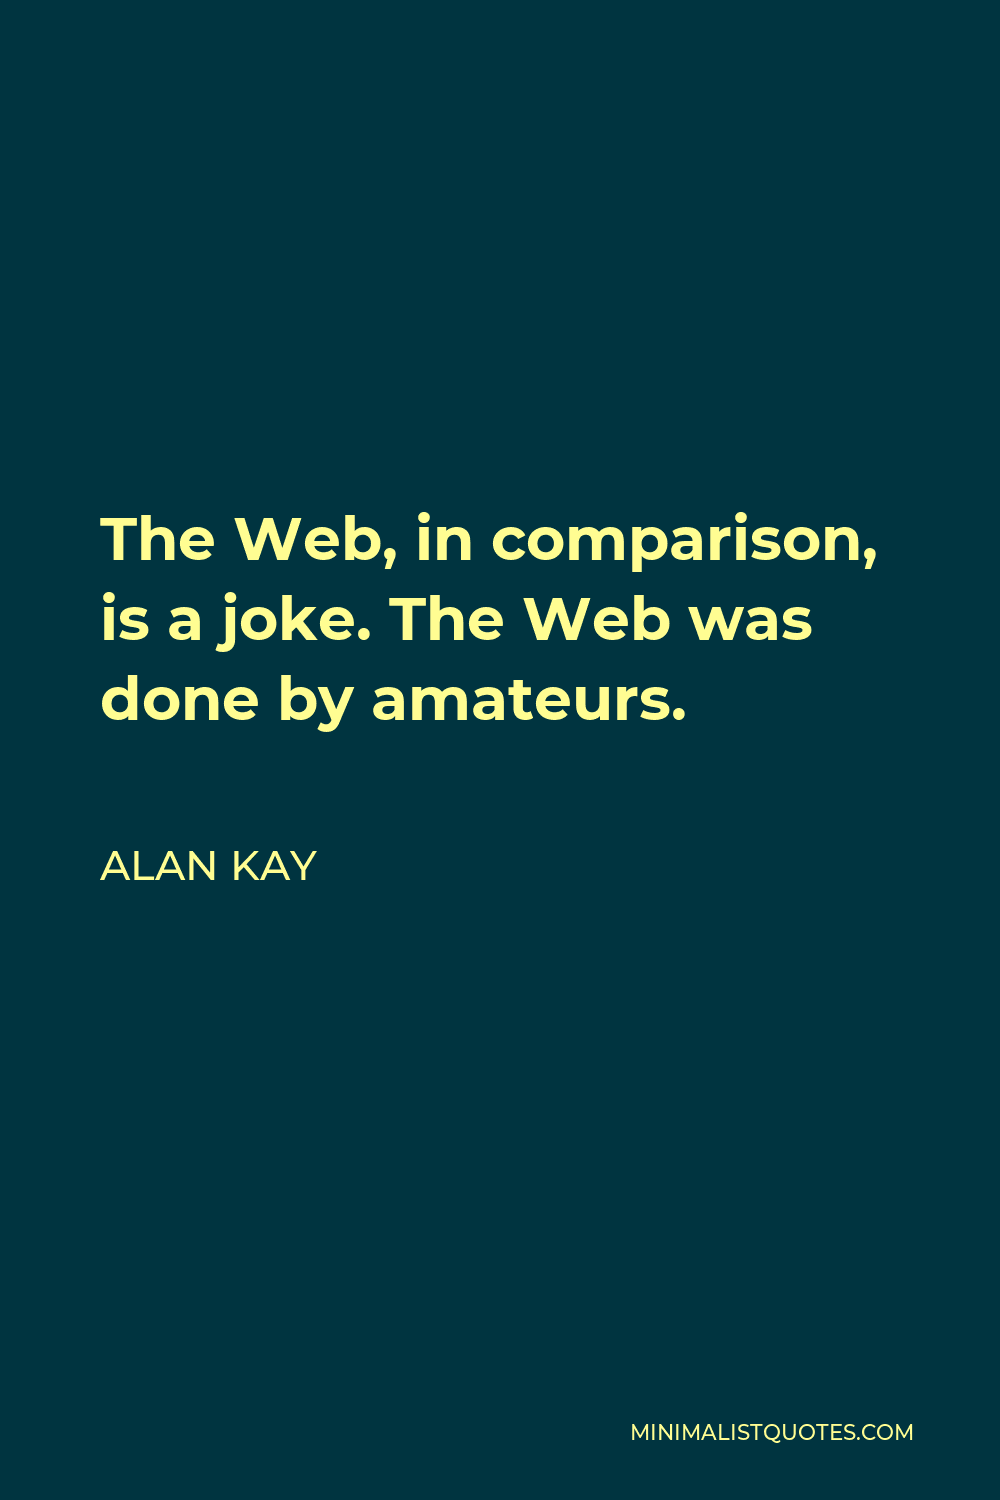 Alan Kay Quote - The Web, in comparison, is a joke. The Web was done by amateurs.